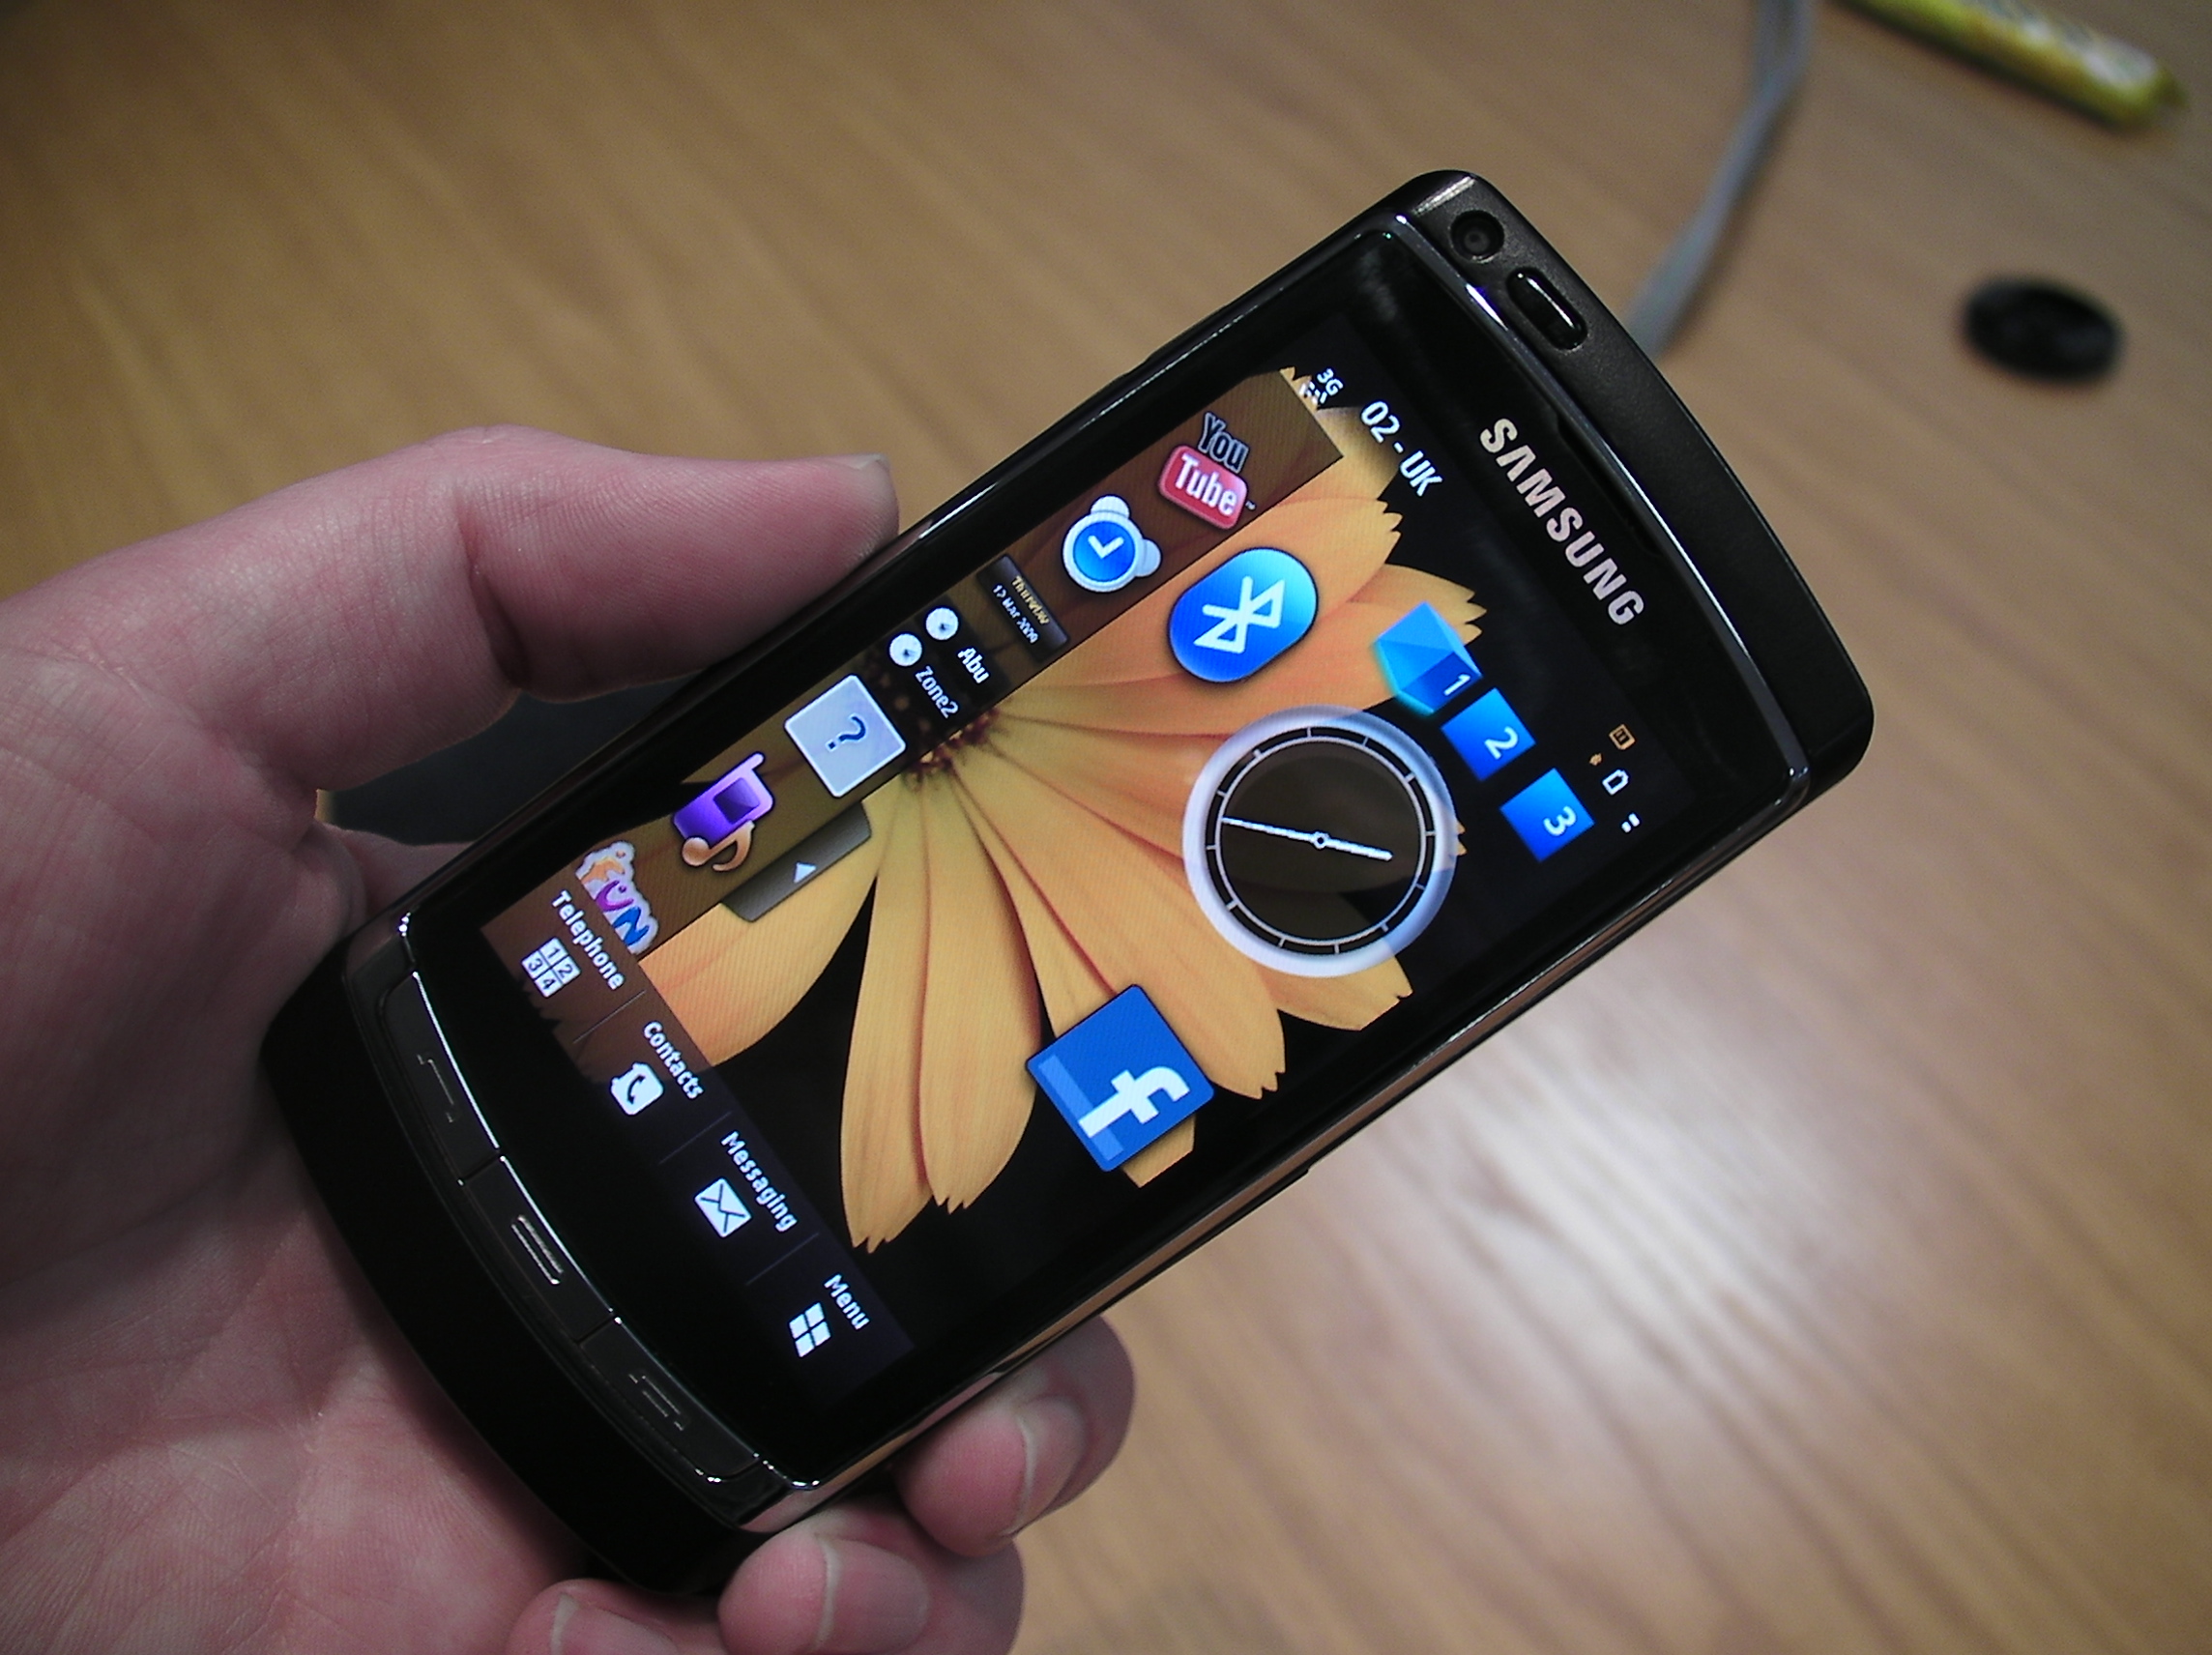 Samsung Omnia HD Preview (i8910) - Part 1 - General Design and Hardware  review - All About Symbian